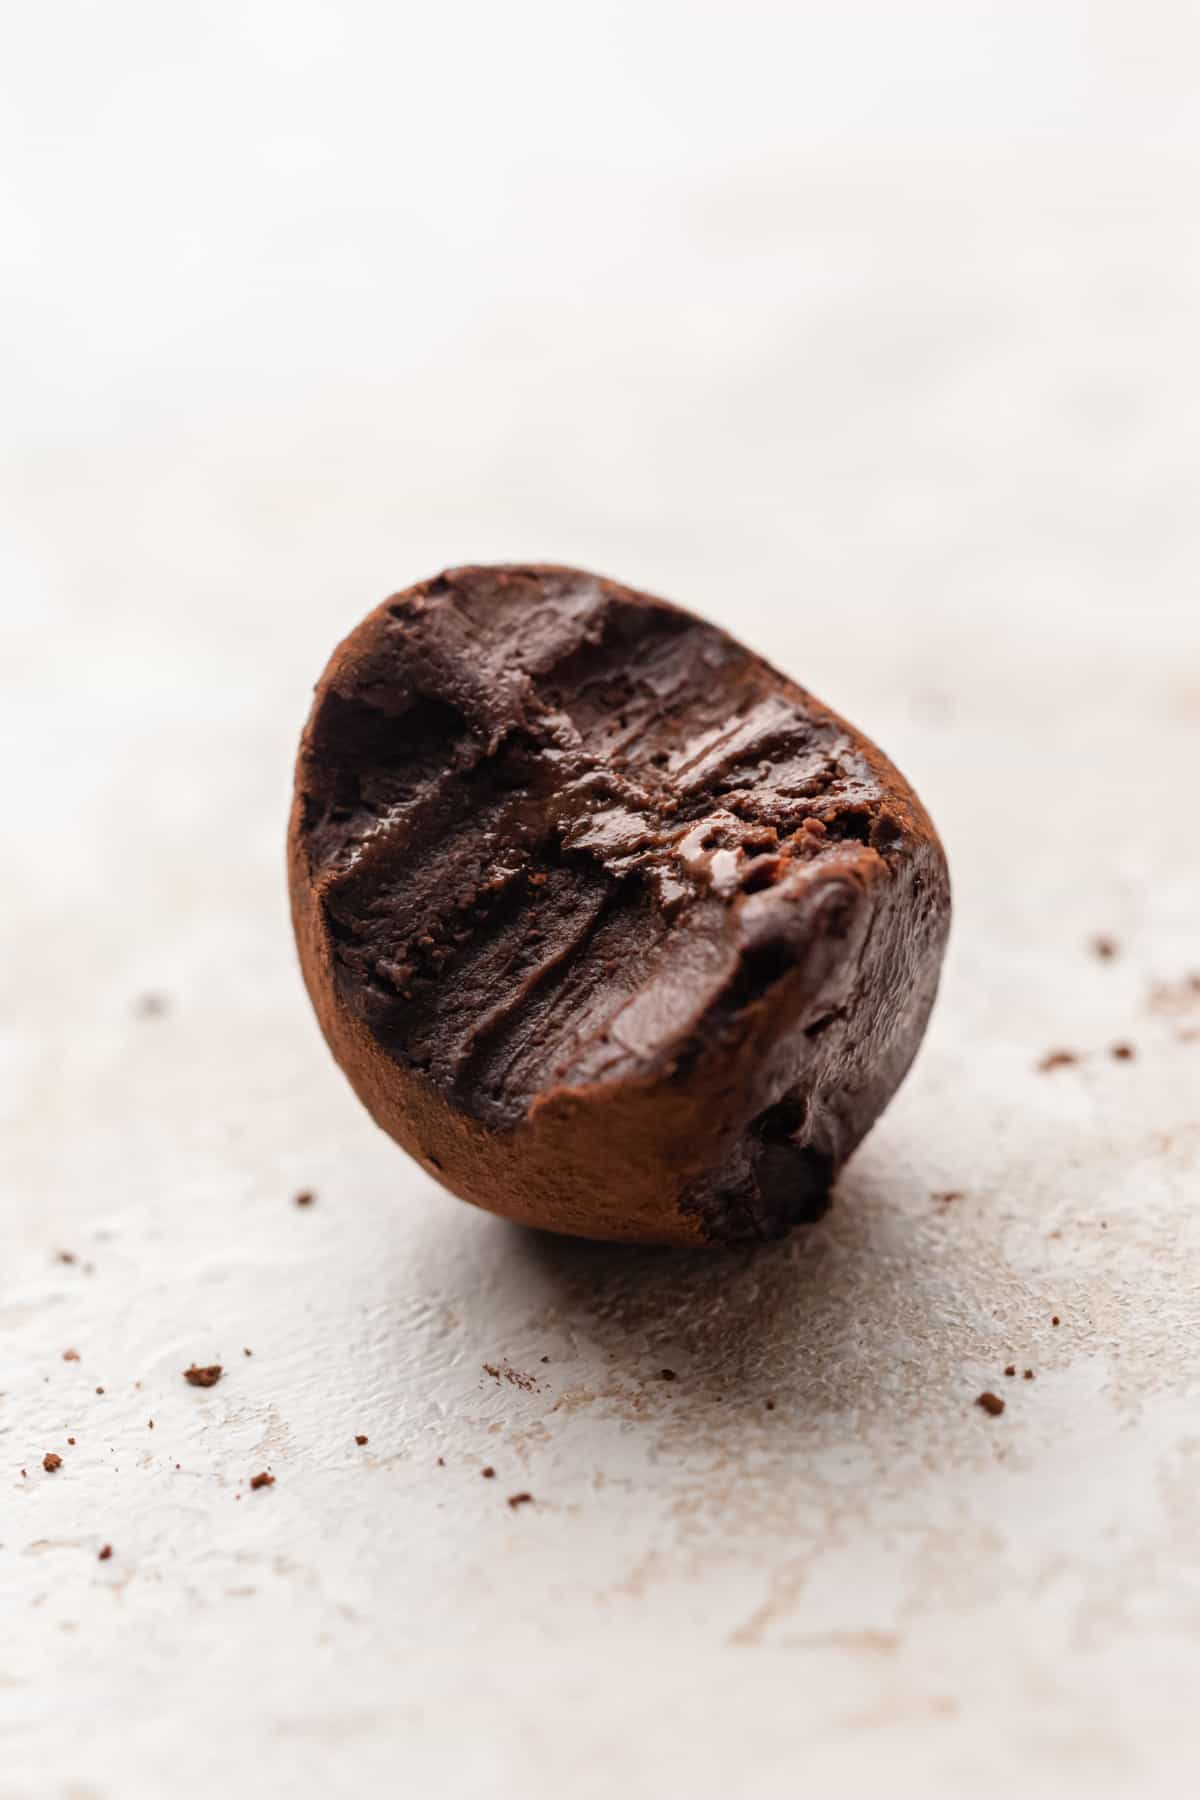 A close up of a chocolate truffle with a bite taken out of it.